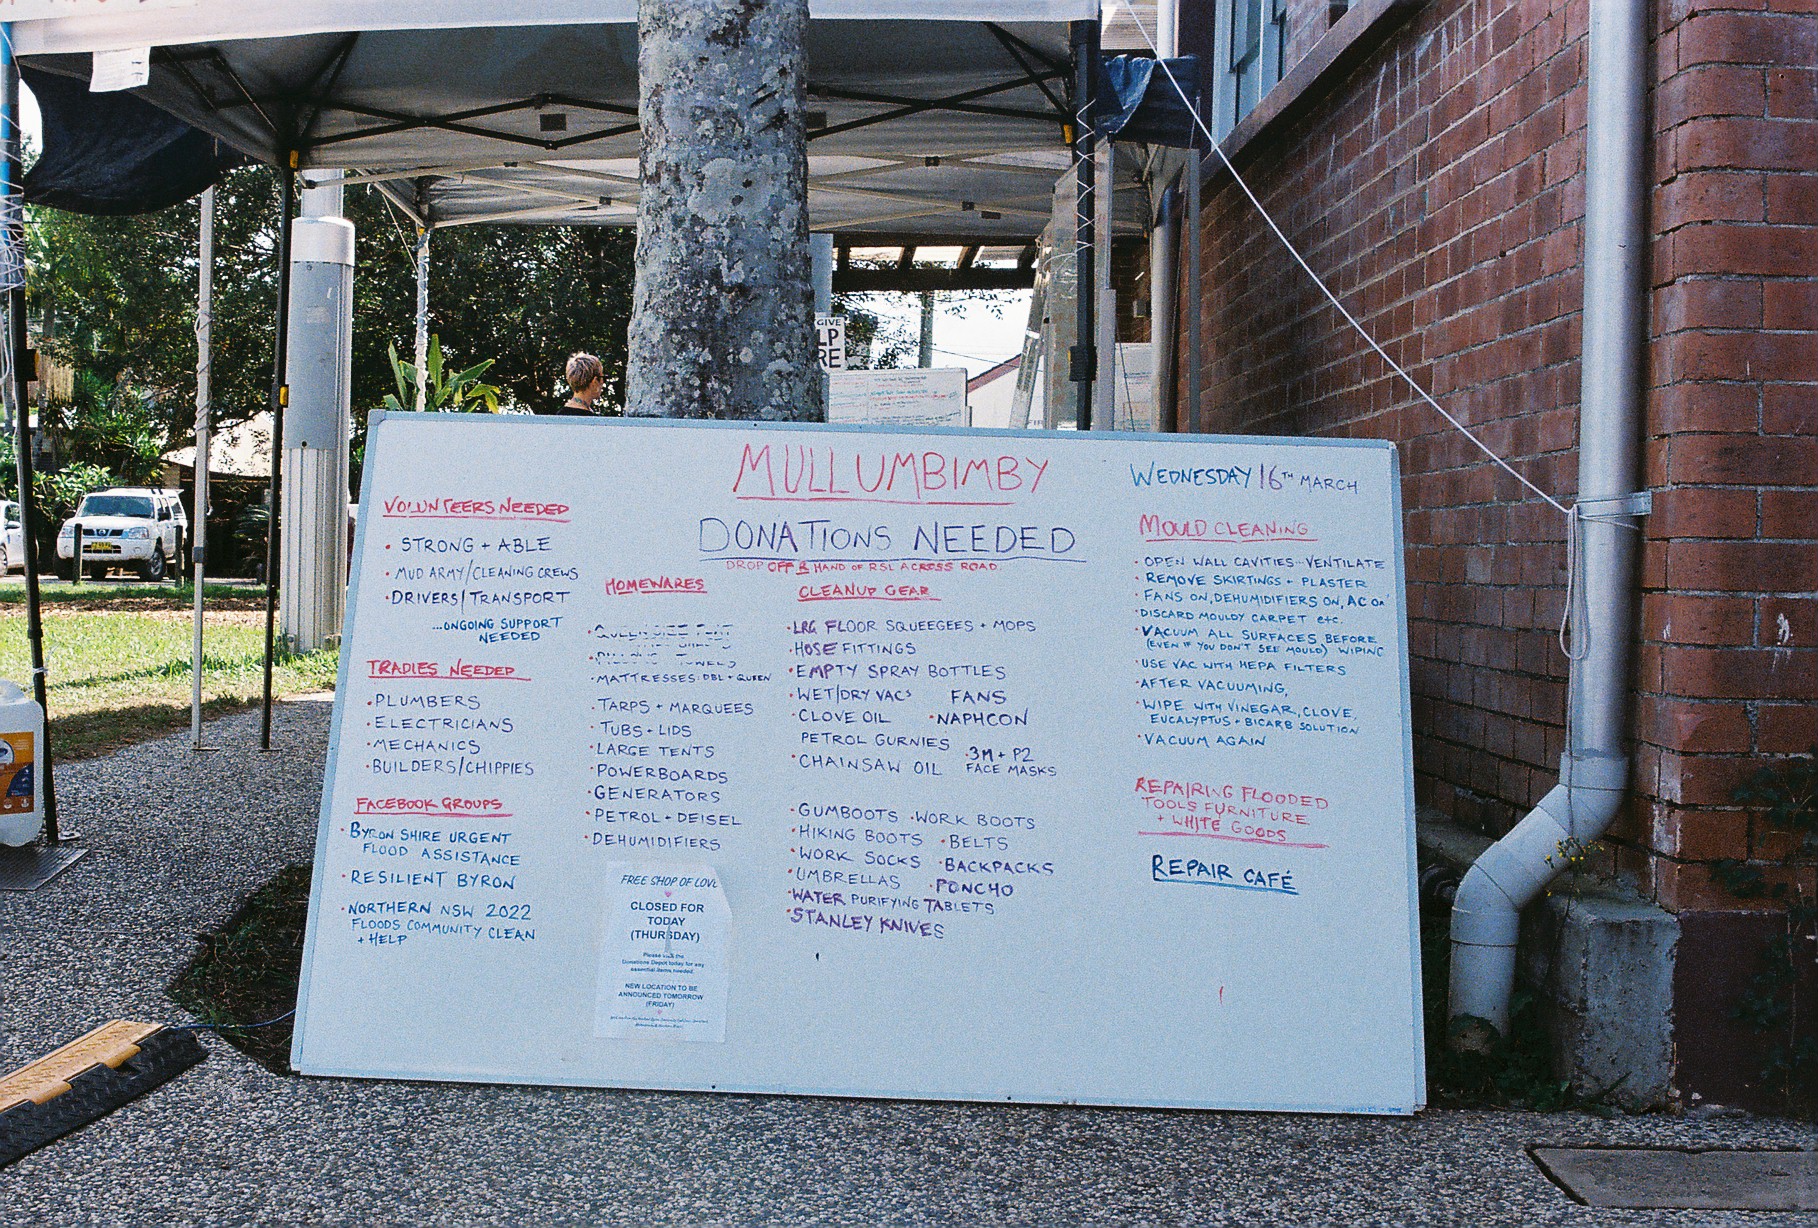 A white board outside Mullumbimby Neighbourhood Centre lizsts tasks that need being done for the flood recovery efforts